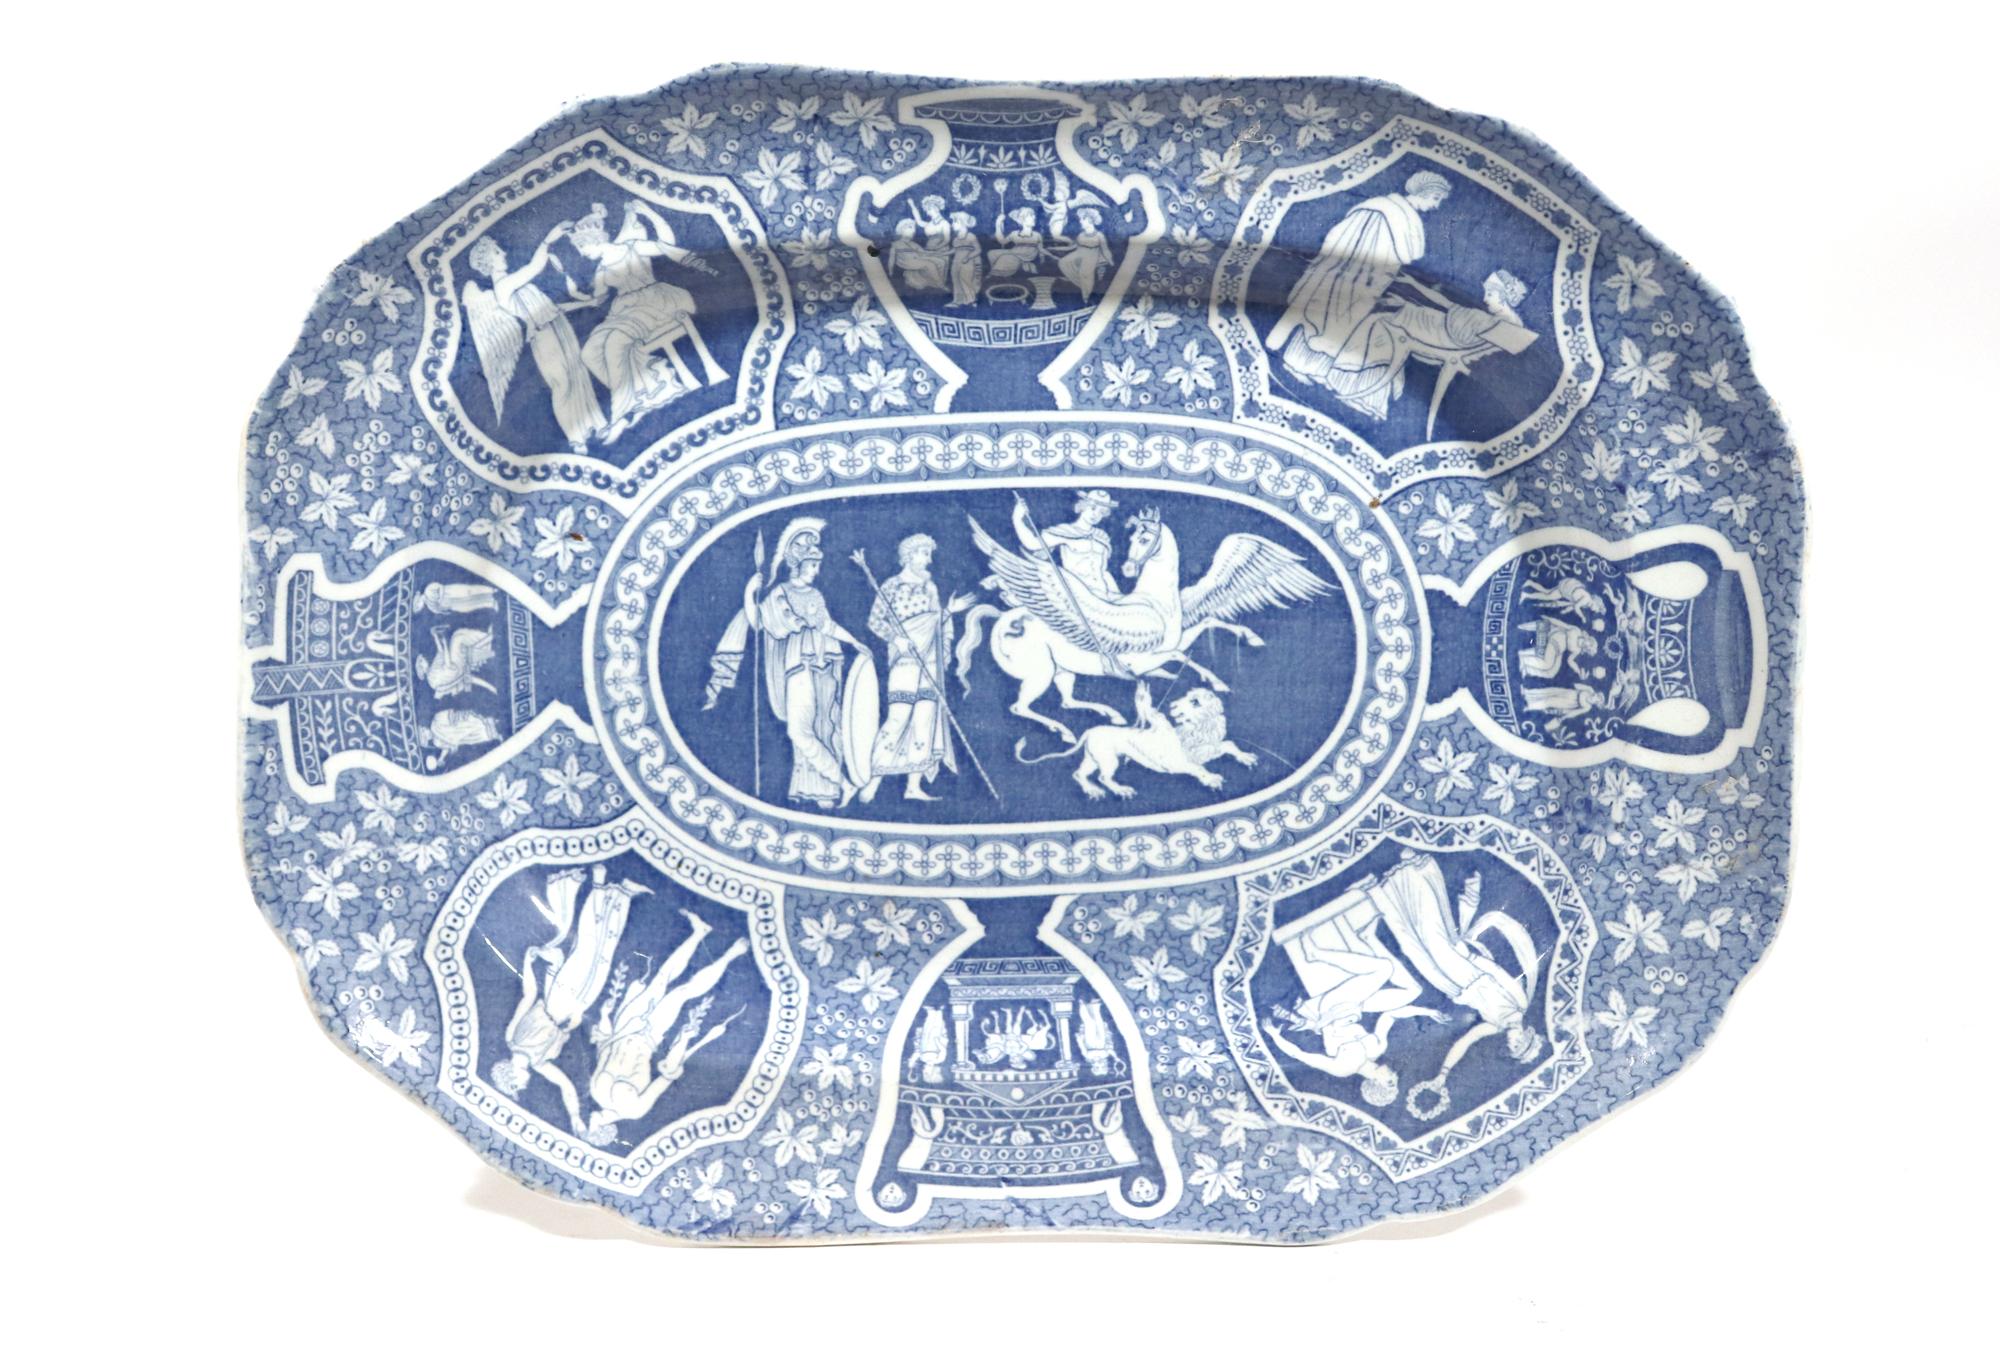 Regency Spode Pottery Neo-Classical Greek Pattern Blue Dish,
Bellerophon's Victory Over Chimera,
Early-19th century 

The Spode Greek pattern pottery, shaped rectangular dish with cantered corners is printed in blue with neo-classical scenes on